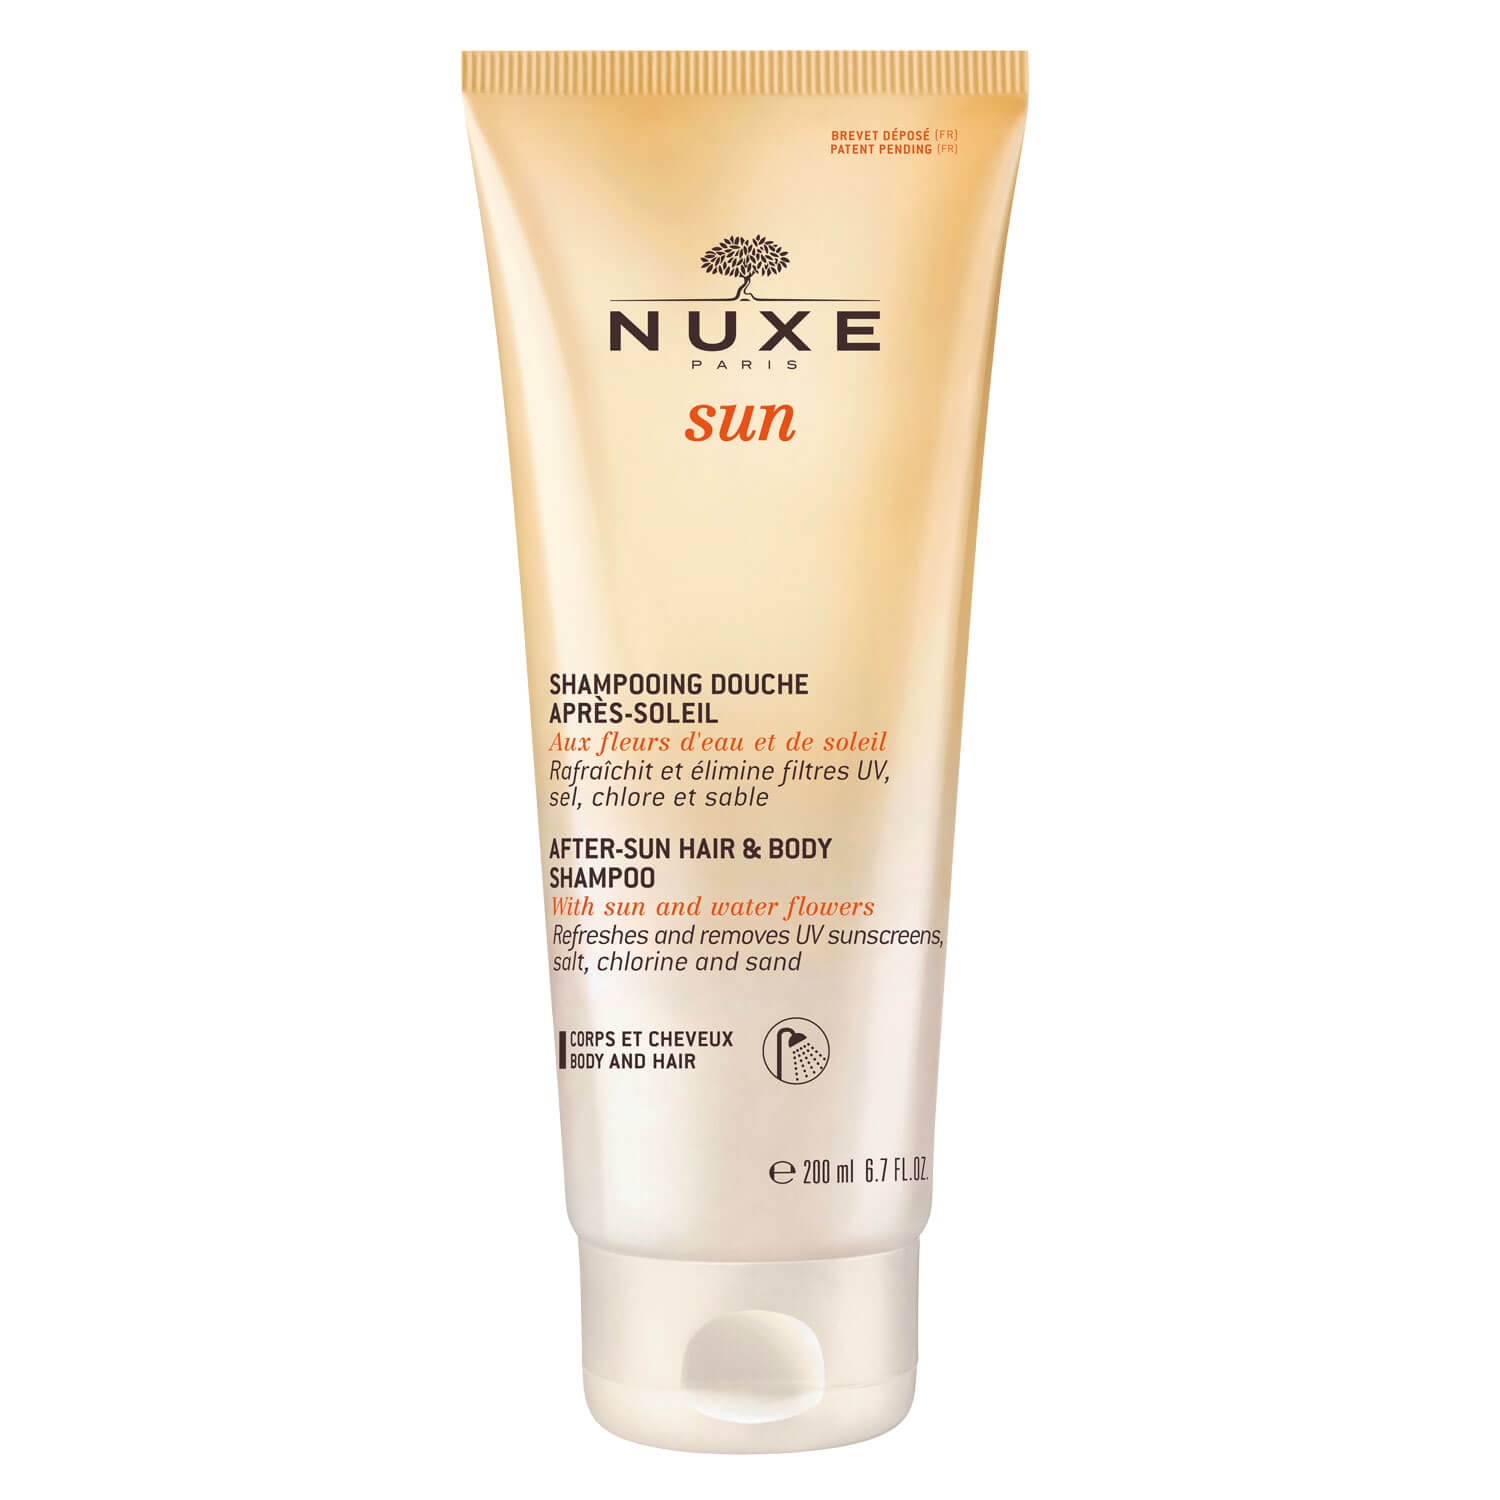 Product image from Nuxe Sun - Shampooing Douche Après-Soleil